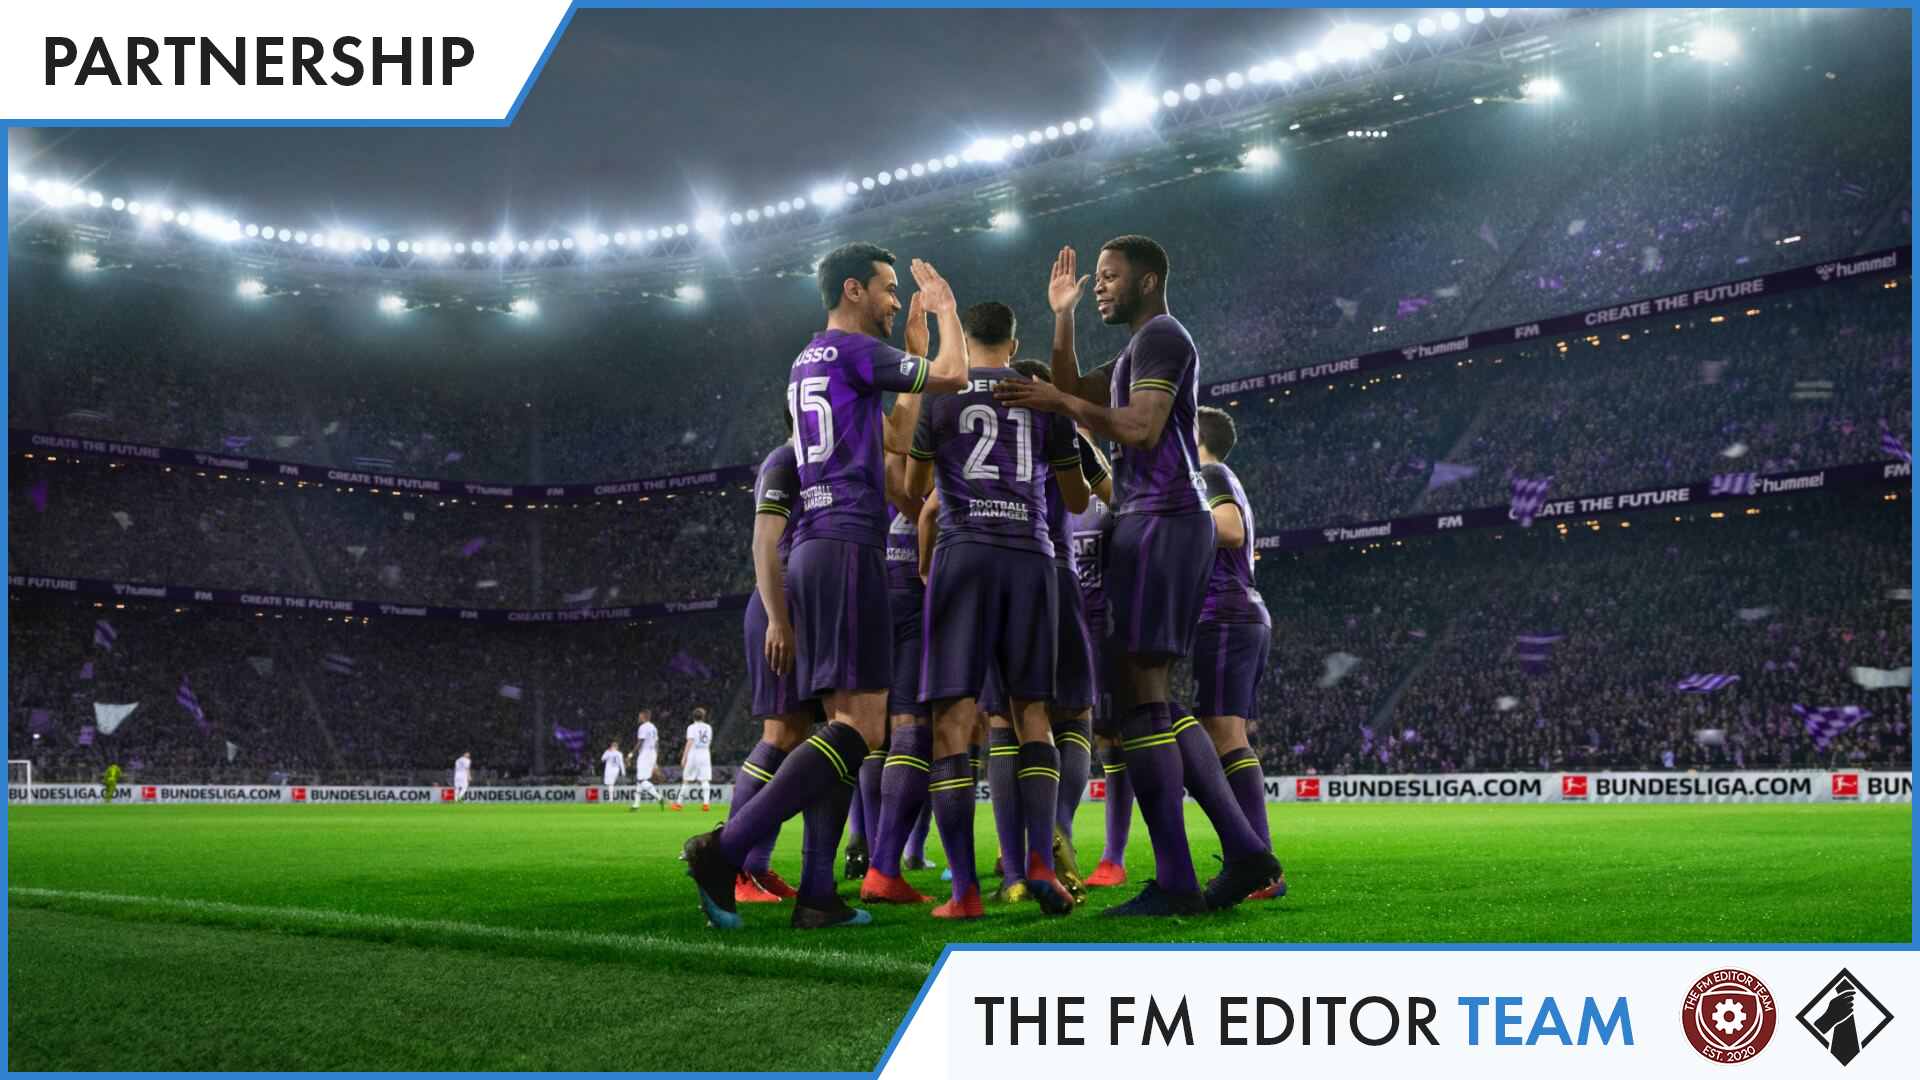 Exclusive: FM Base and The FM Editor Team are teaming up